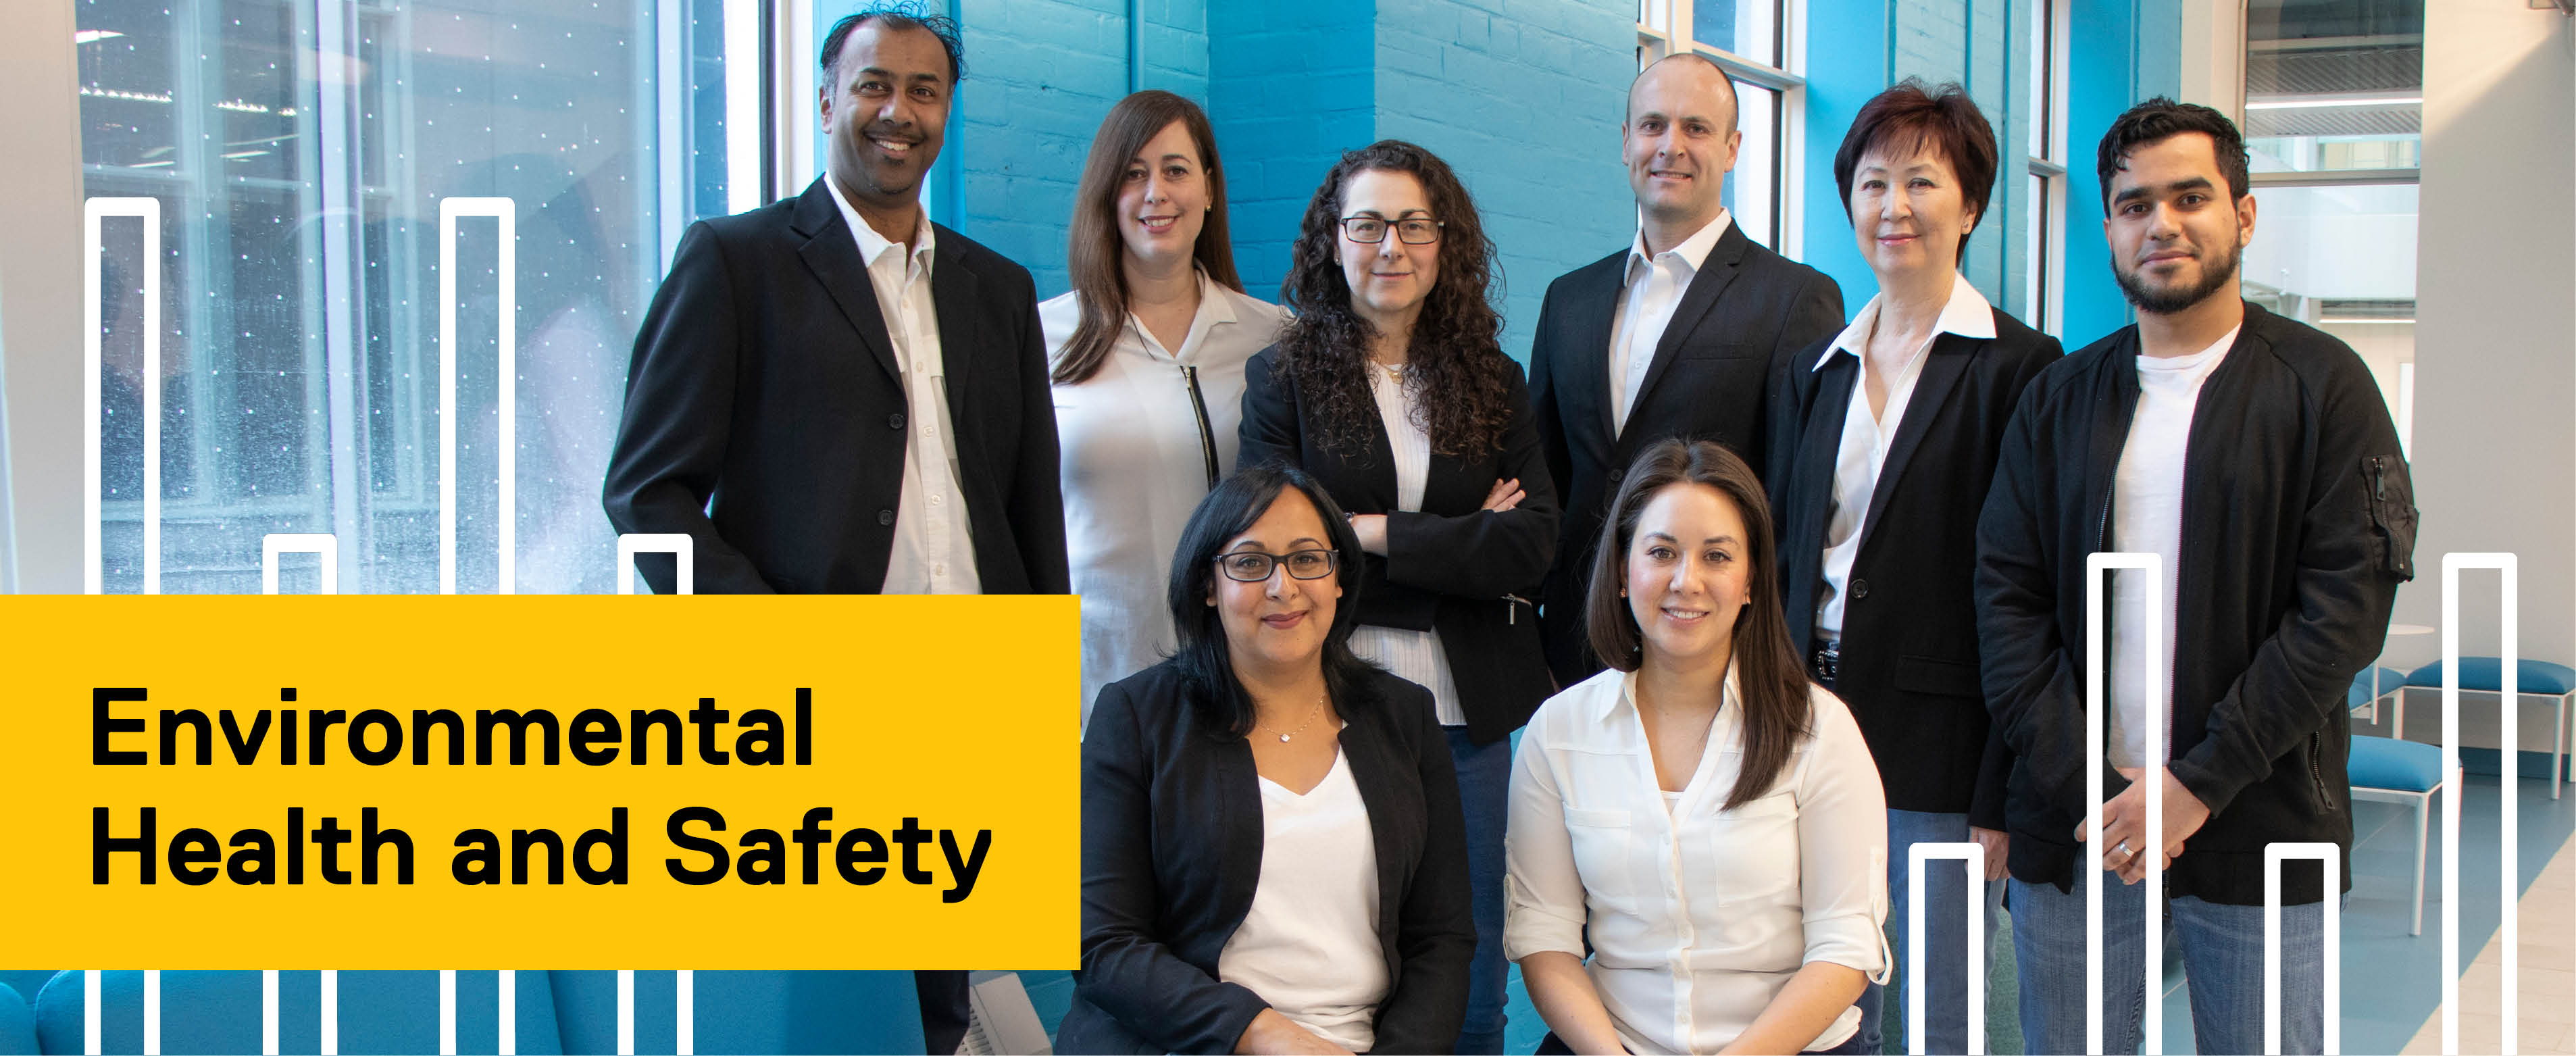 The Environmental Health and Safety team.